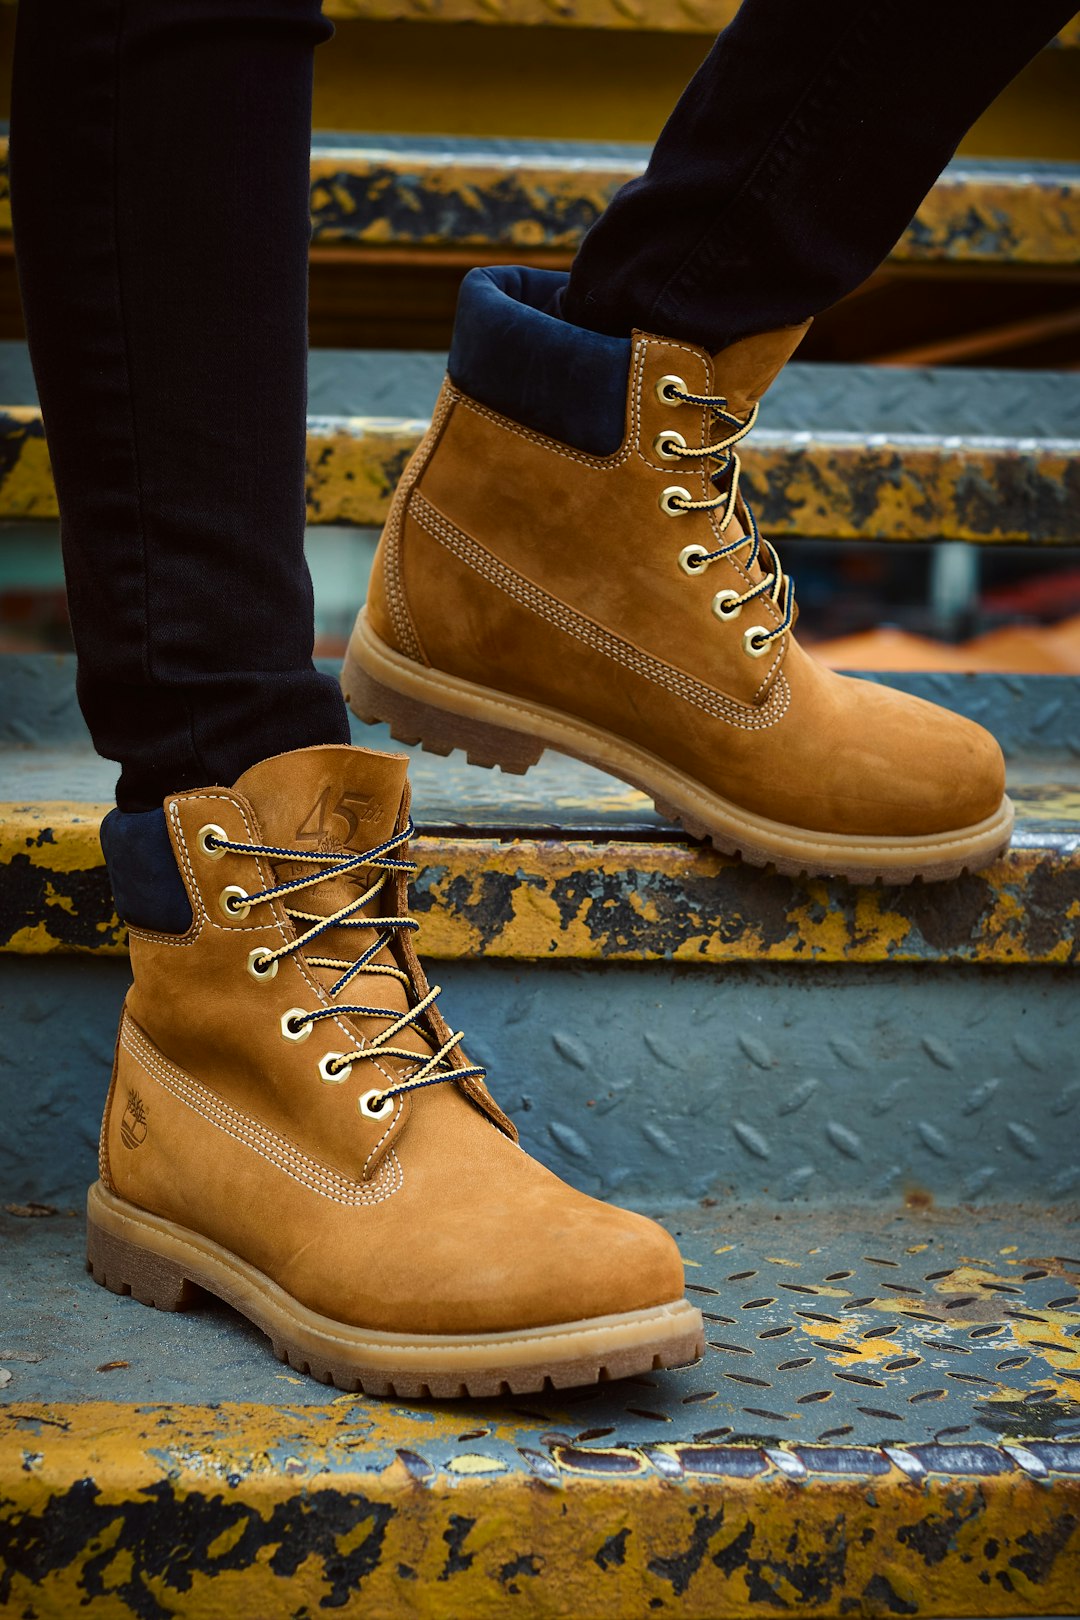 Boot Pictures [HQ] | Download Free Images on Unsplash